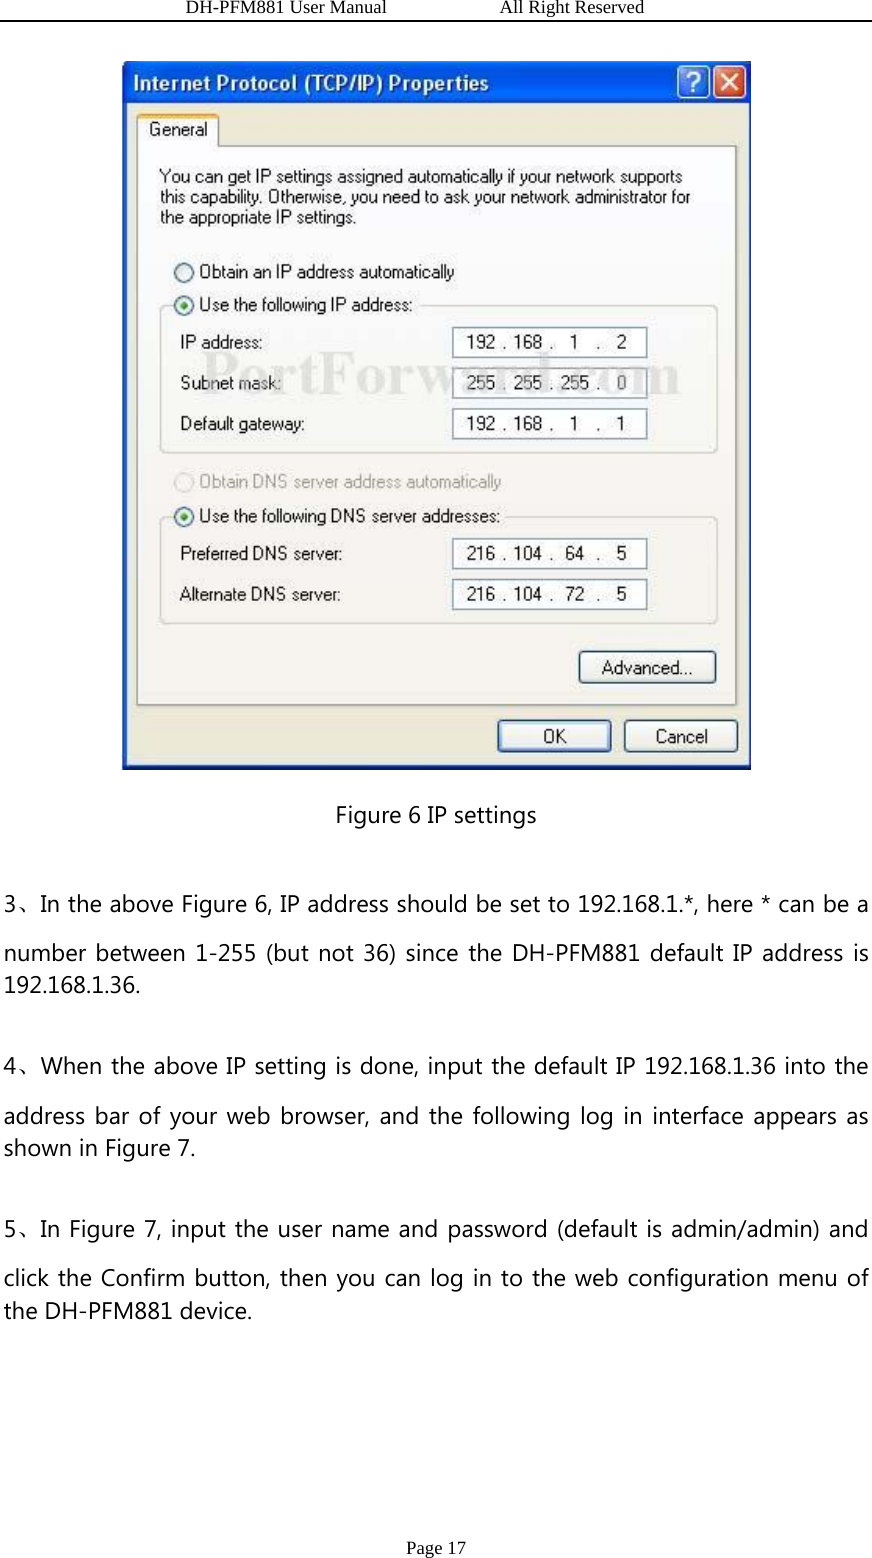                   DH-PFM881 User Manual            All Right Reserved Page 17  Figure 6 IP settings 3、In the above Figure 6, IP address should be set to 192.168.1.*, here * can be a number between 1-255 (but not 36) since the DH-PFM881 default IP address is 192.168.1.36. 4、When the above IP setting is done, input the default IP 192.168.1.36 into the address bar of your web browser, and the following log in interface appears as shown in Figure 7. 5、In Figure 7, input the user name and password (default is admin/admin) and click the Confirm button, then you can log in to the web configuration menu of the DH-PFM881 device. 